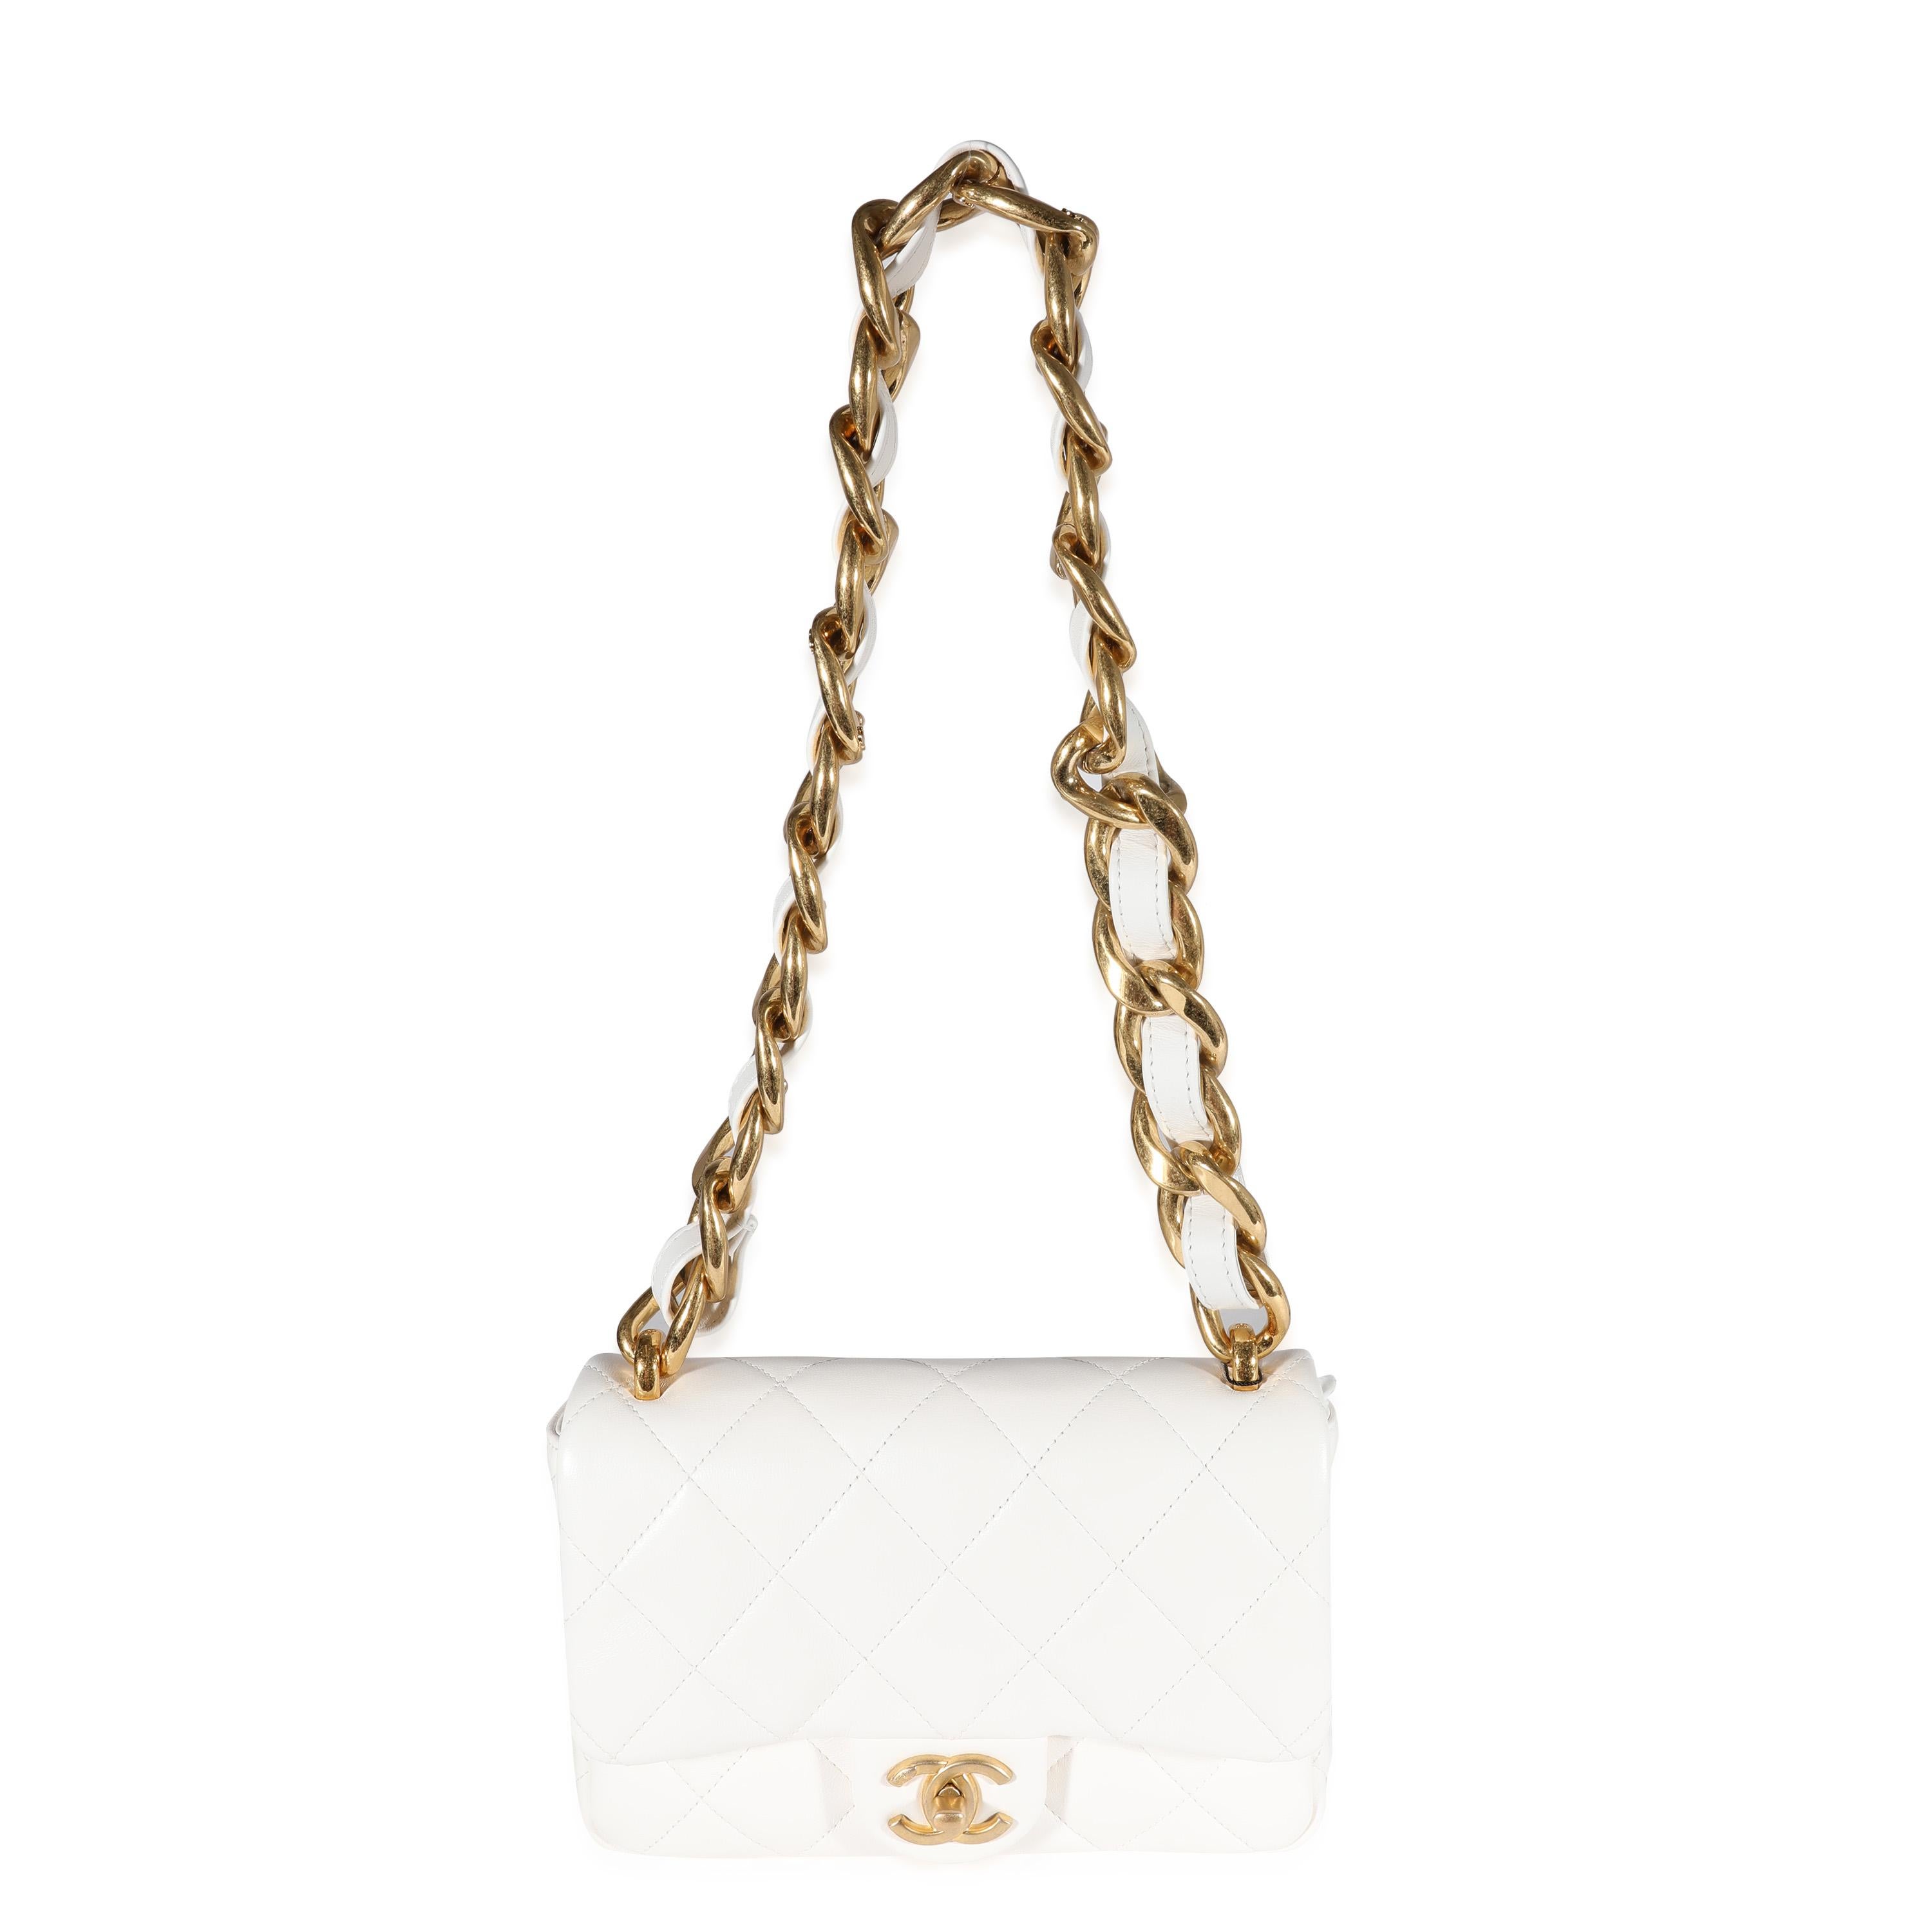 Listing Title: Chanel White Quilted Lambskin Small Funky Town Flap Bag
SKU: 122275
MSRP: 4900.00
Condition: Pre-owned 
Handbag Condition: Excellent
Condition Comments: Excellent Condition. Plastic at some hardware. No visible signs of wear.
Brand: